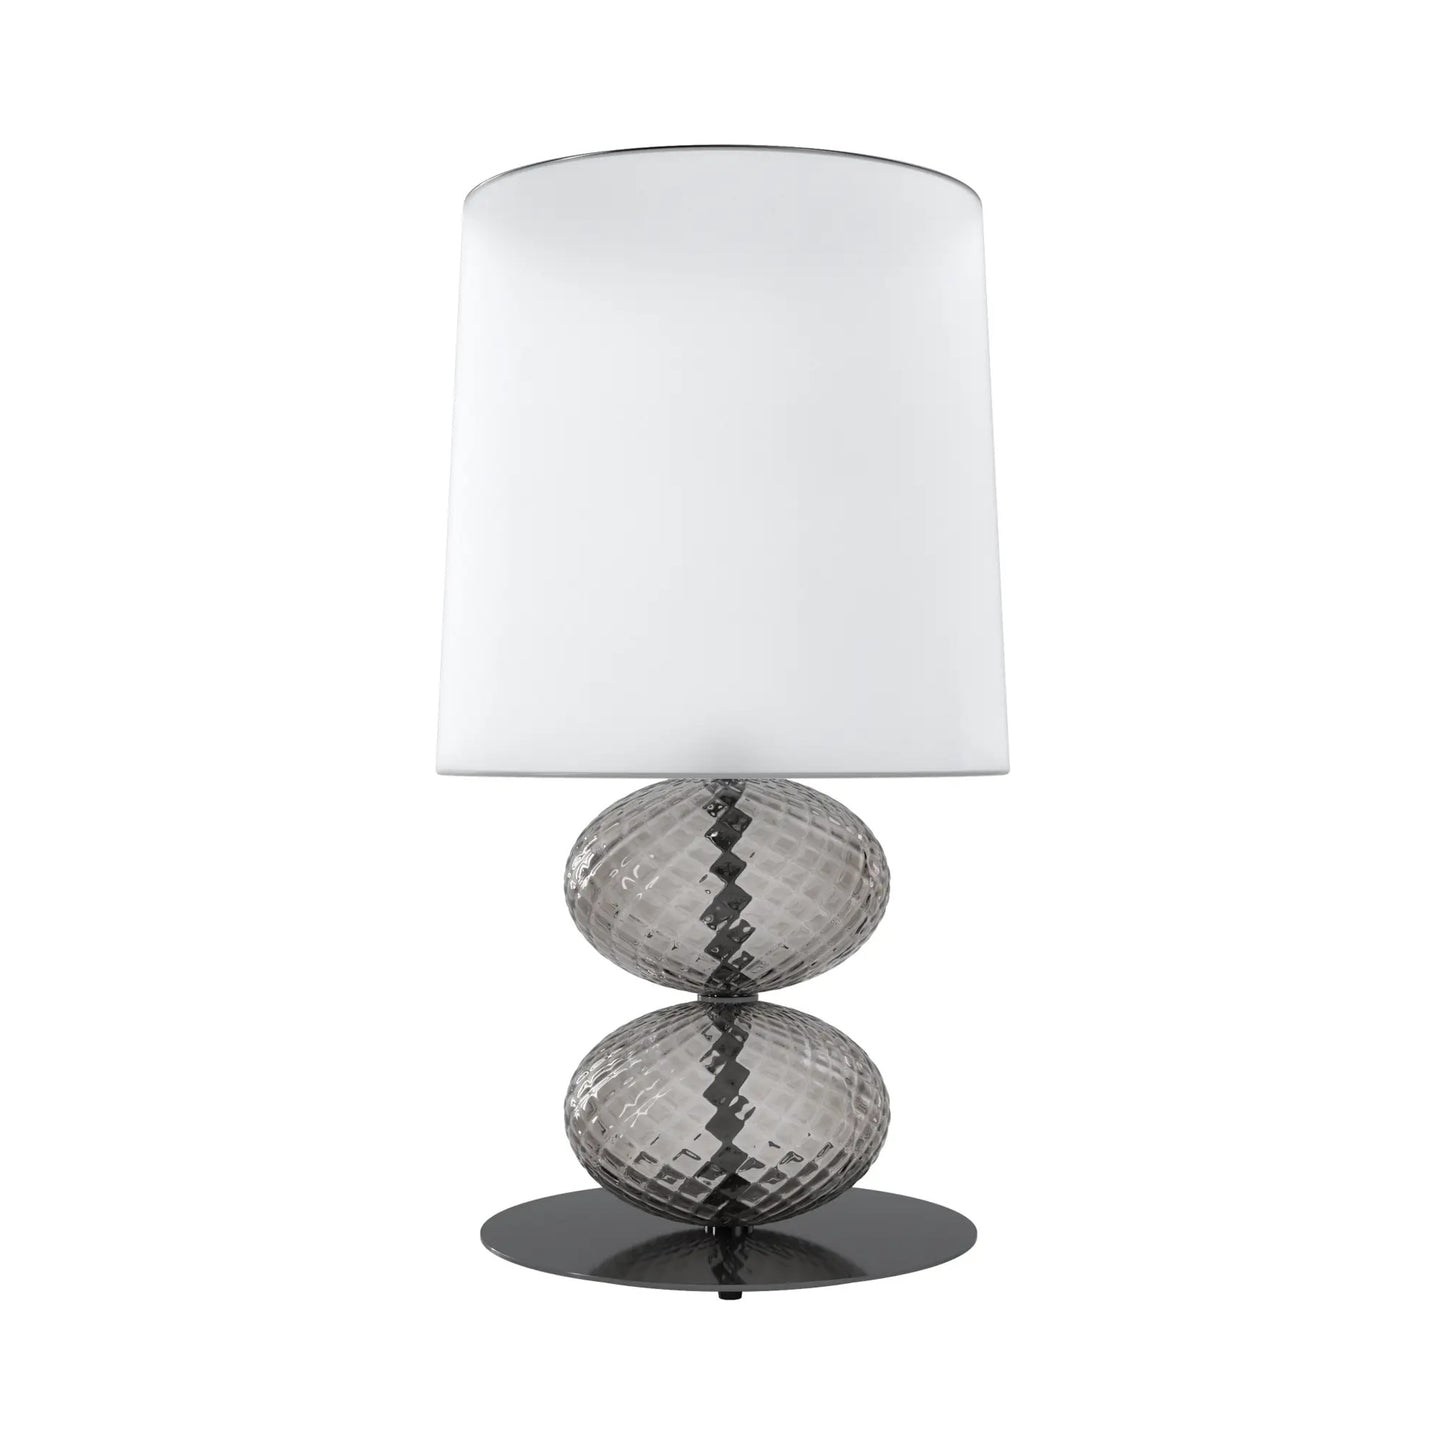 Abat-Jour Lamp by Venini | Stem features spheres capturing light reflections with surface texture from the ancient "balloton" technique | Table lamp adorned with one to three blown glass "balloton" elements in various colors | Base available in chrome-plated or black nickel metal | White fabric lampshade | Home Decor Lighting | 2Jour Concierge, your luxury lifestyle shop